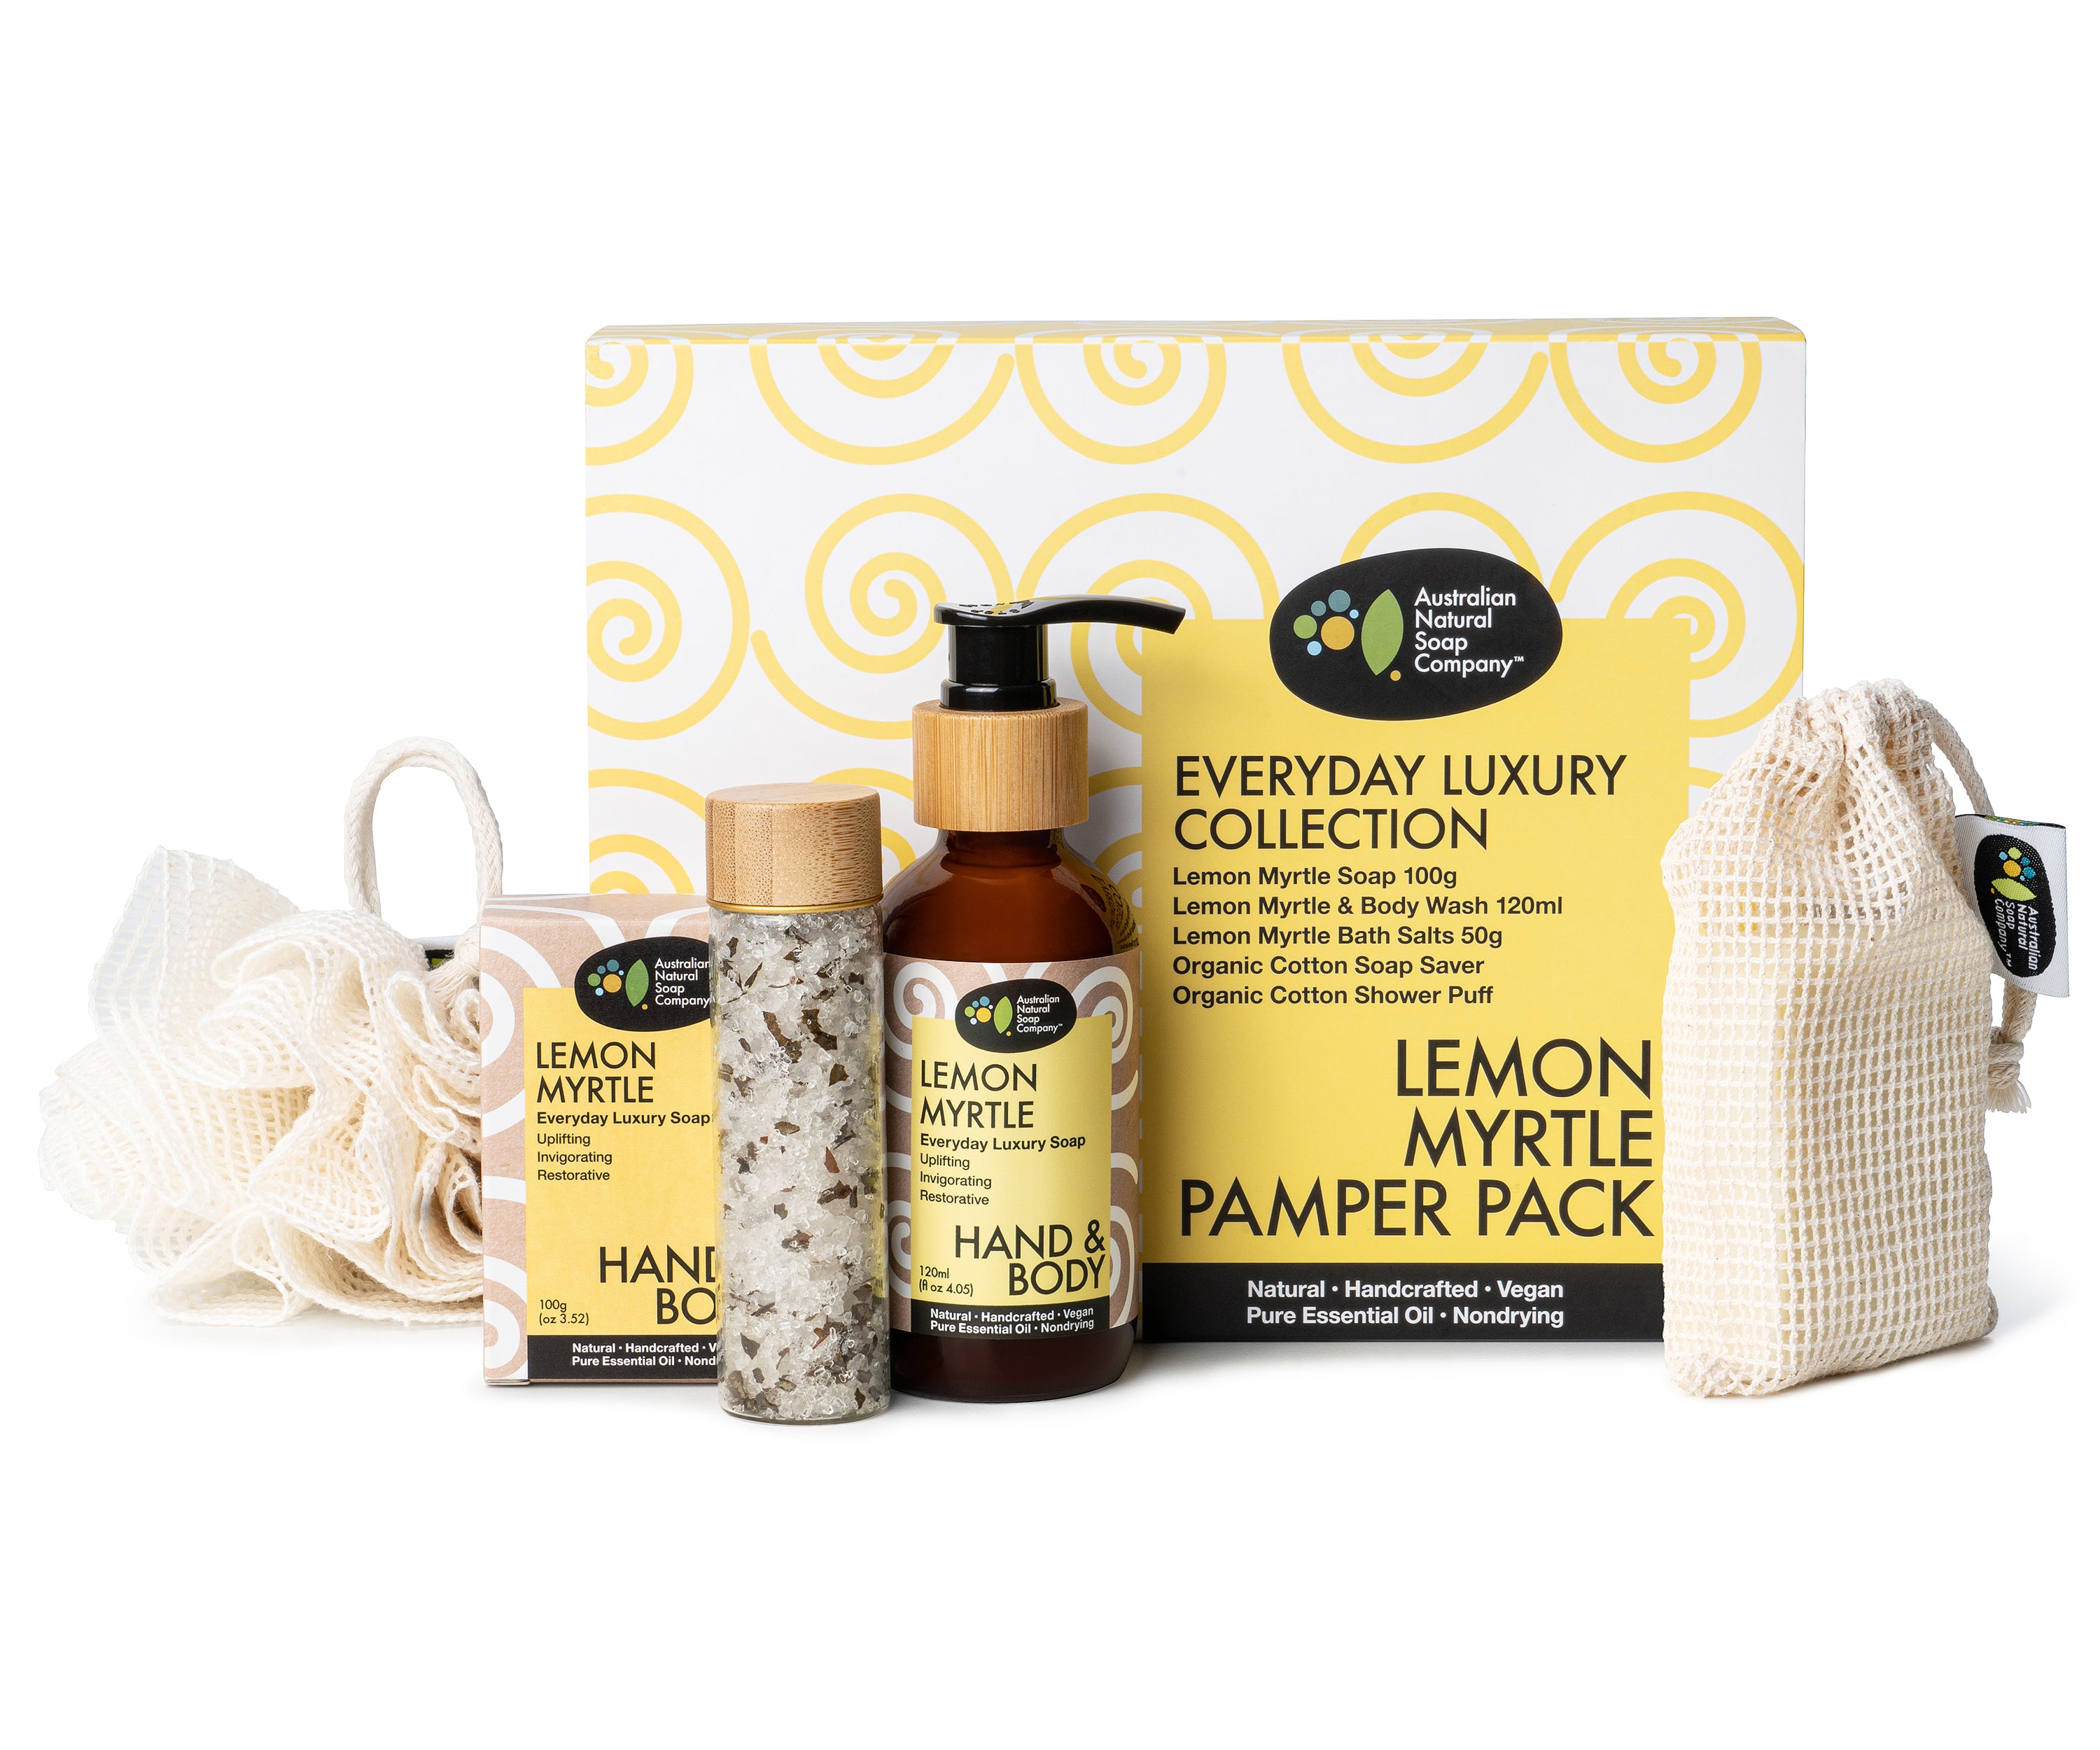 Image of a lemon Myrtle pamper gift box showcasing its contents. The gift box includes a cotton shower puff, a cotton soap saver bag, a glass bottle with a pump top surrounded by a wooden accent, a glass vial with a wooden top containing bath salts, and a box containing a soap bar. All labels on the items are in a upbeat yellow color, indicating the lemon myrtle theme of the pamper pack.